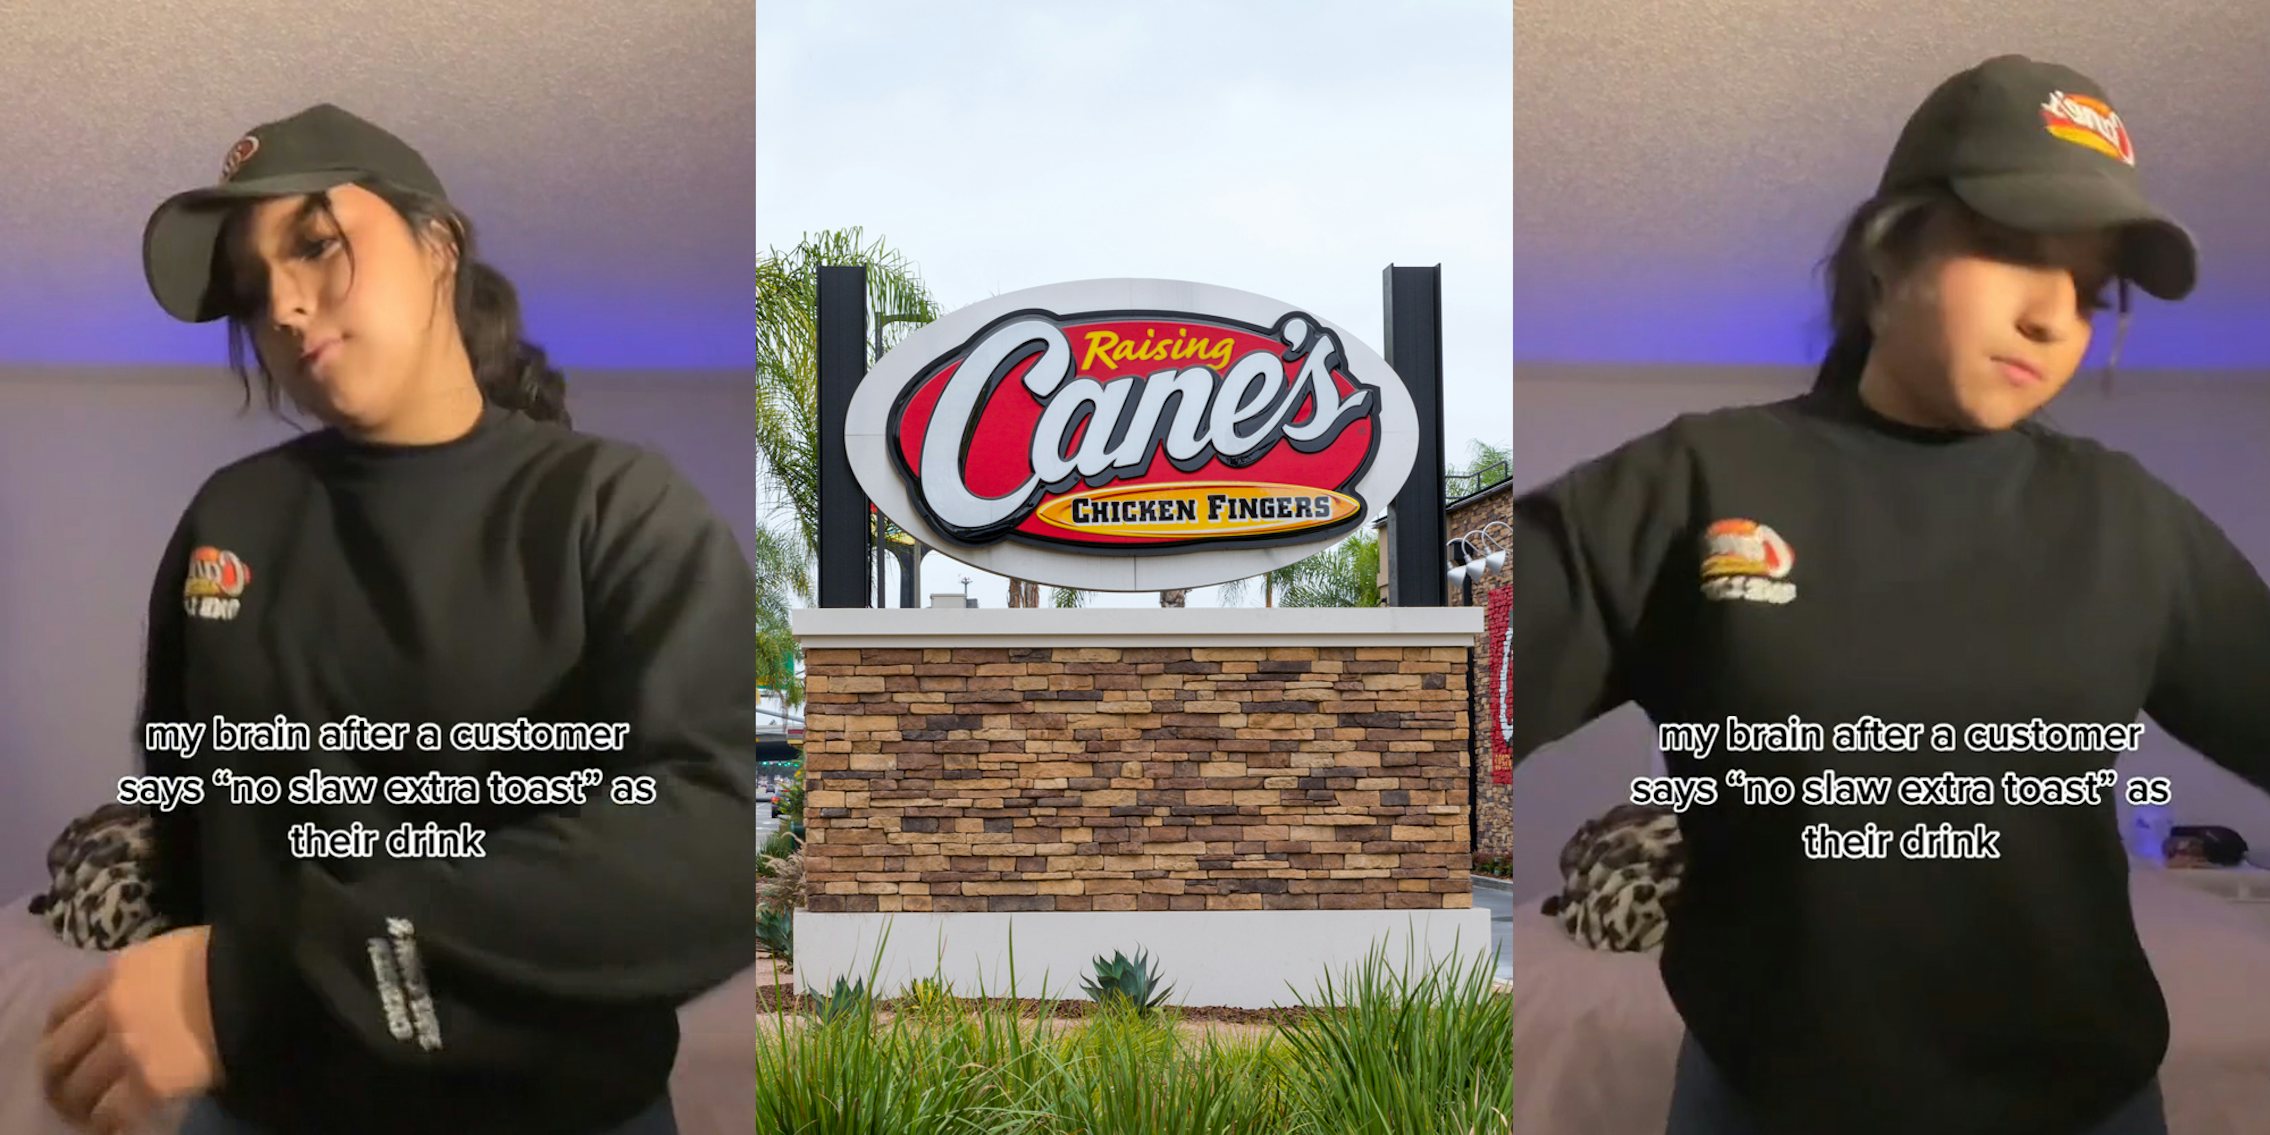 Raising Cane's employee dancing with caption 'my brain after a customer says 'no slaw extra toast' as their drink' (l) Raising Cane's sign outside (c) Raising Cane's employee dancing with caption 'my brain after a customer says 'no slaw extra toast' as their drink' (r)